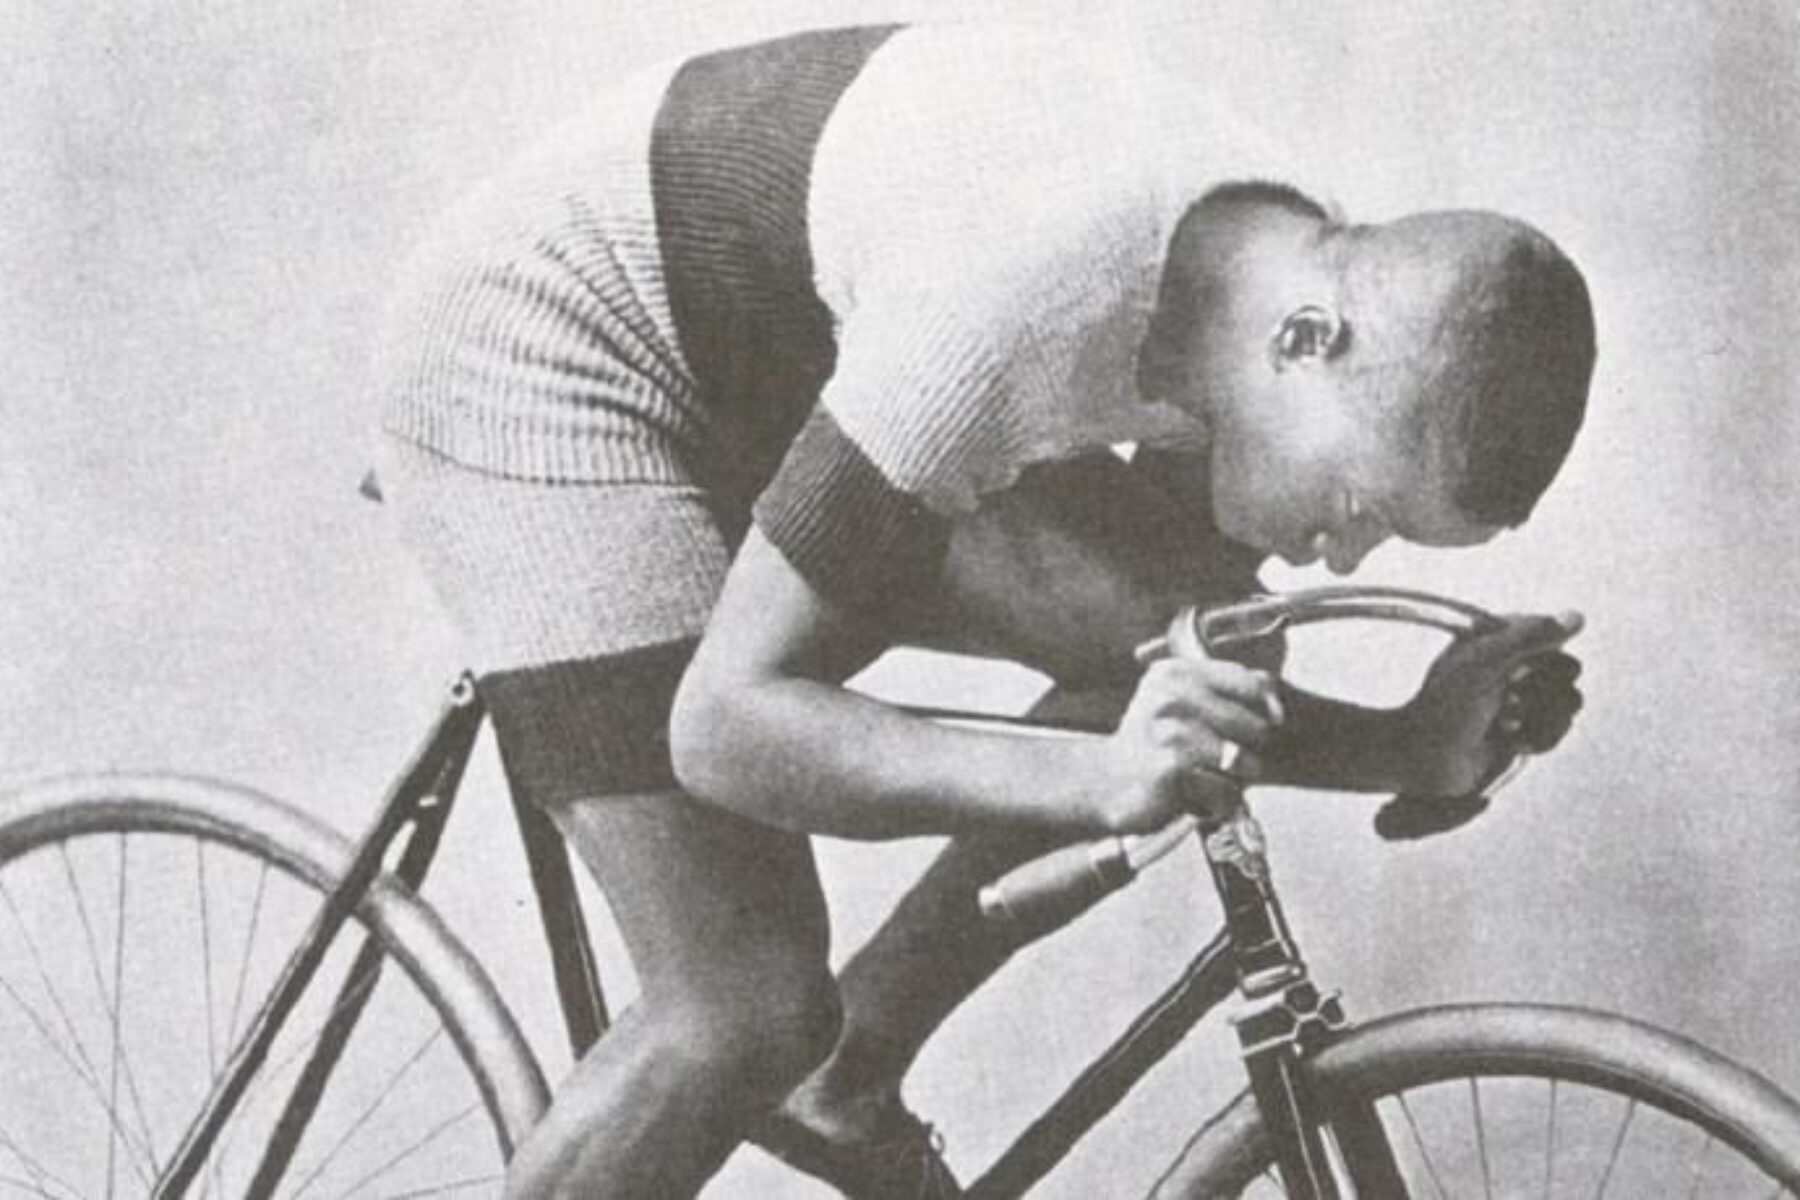 Taylor on the chainless bicycle on which he won the world championship and broke world records in 1899. Uncredited photo, Taylor scrapbook. | Courtesy Major Taylor Association, Inc.